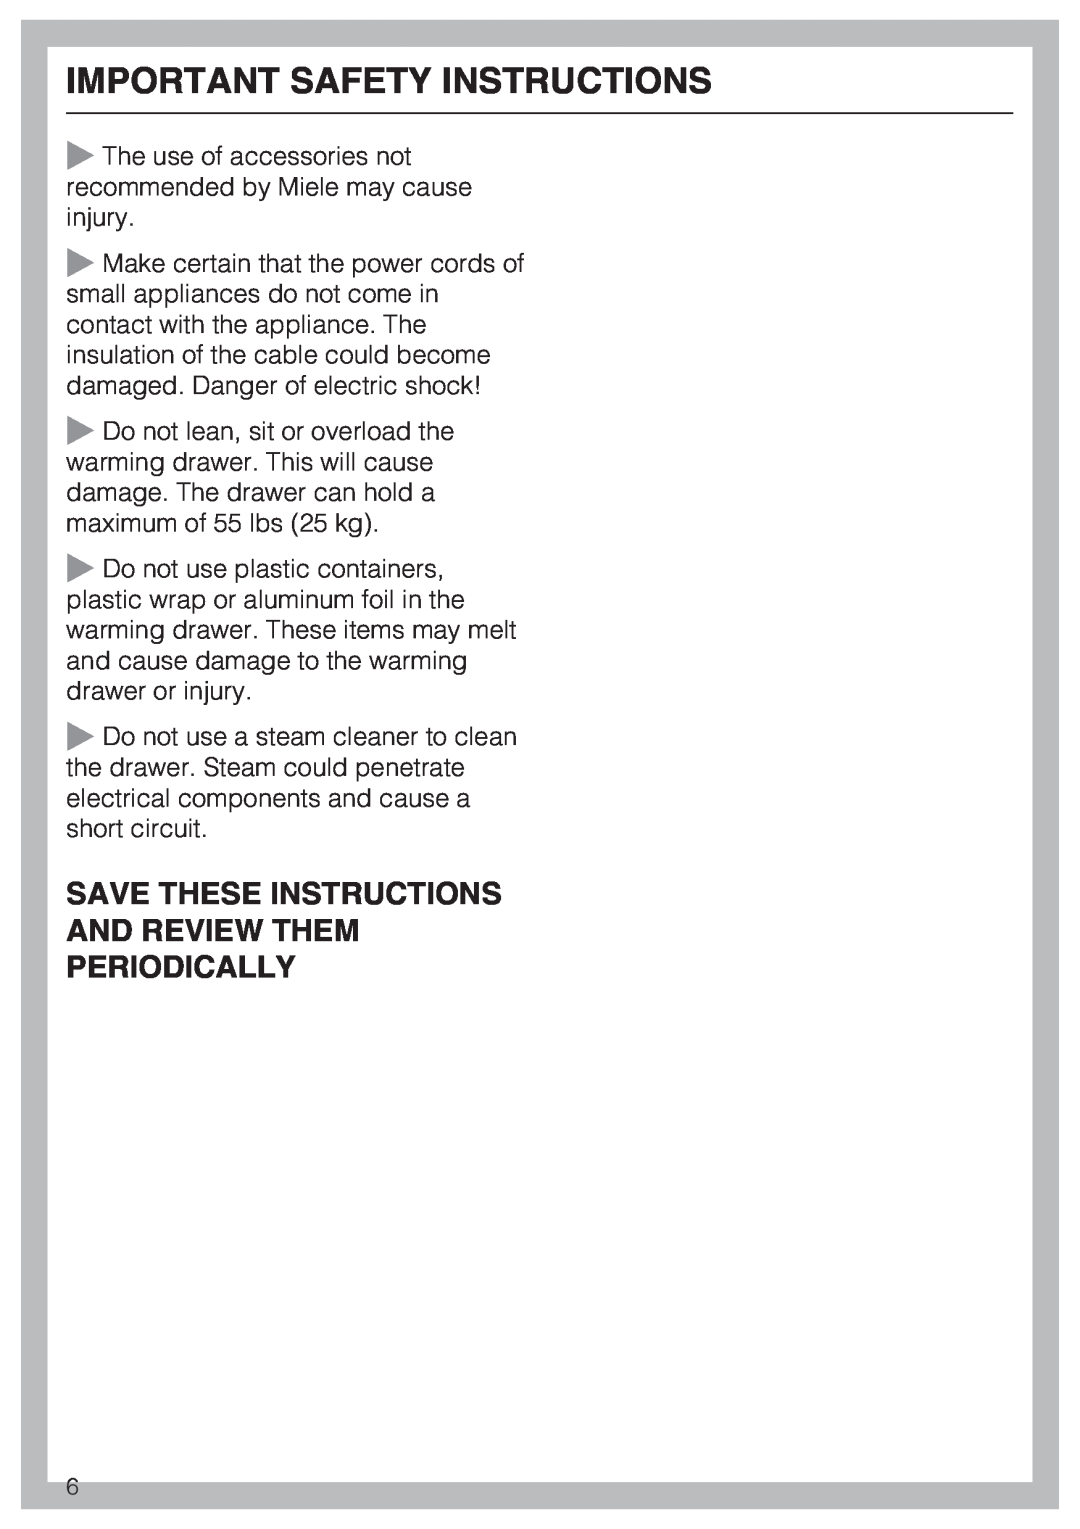 Miele ESW48XX, ESW 408X-14 Save These Instructions And Review Them Periodically, Important Safety Instructions 